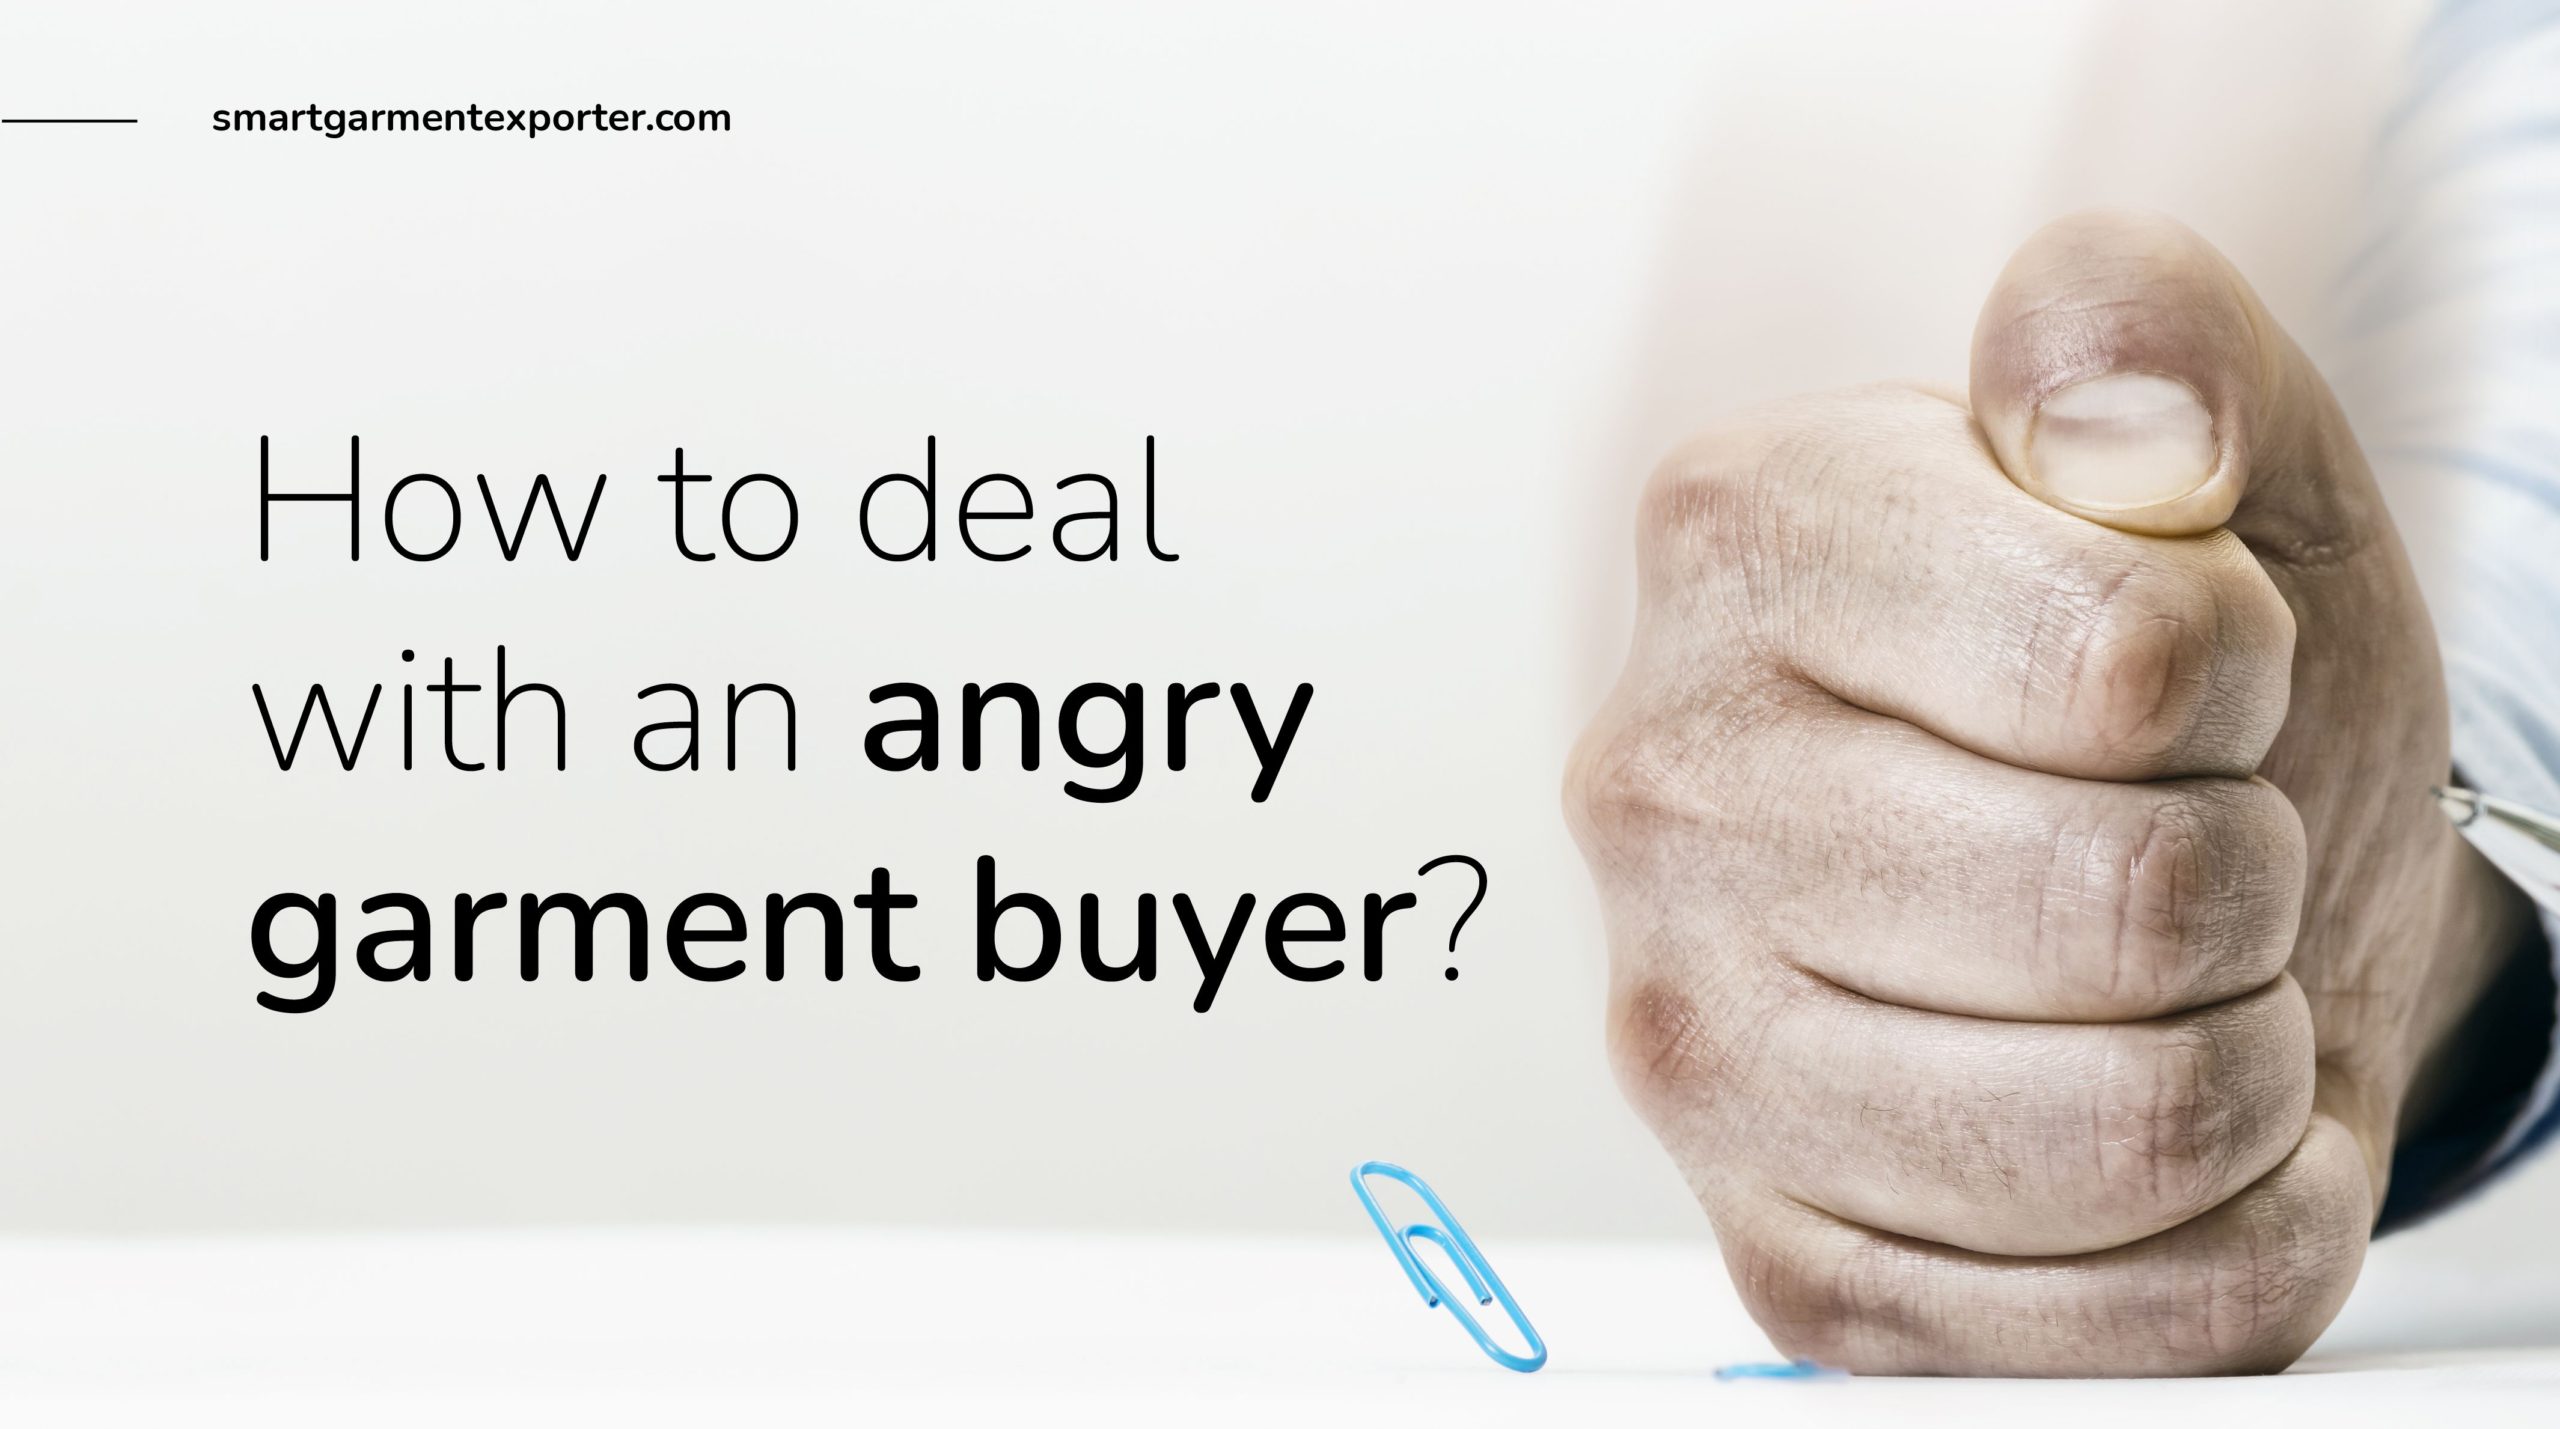 How to deal with an angry garment buyer